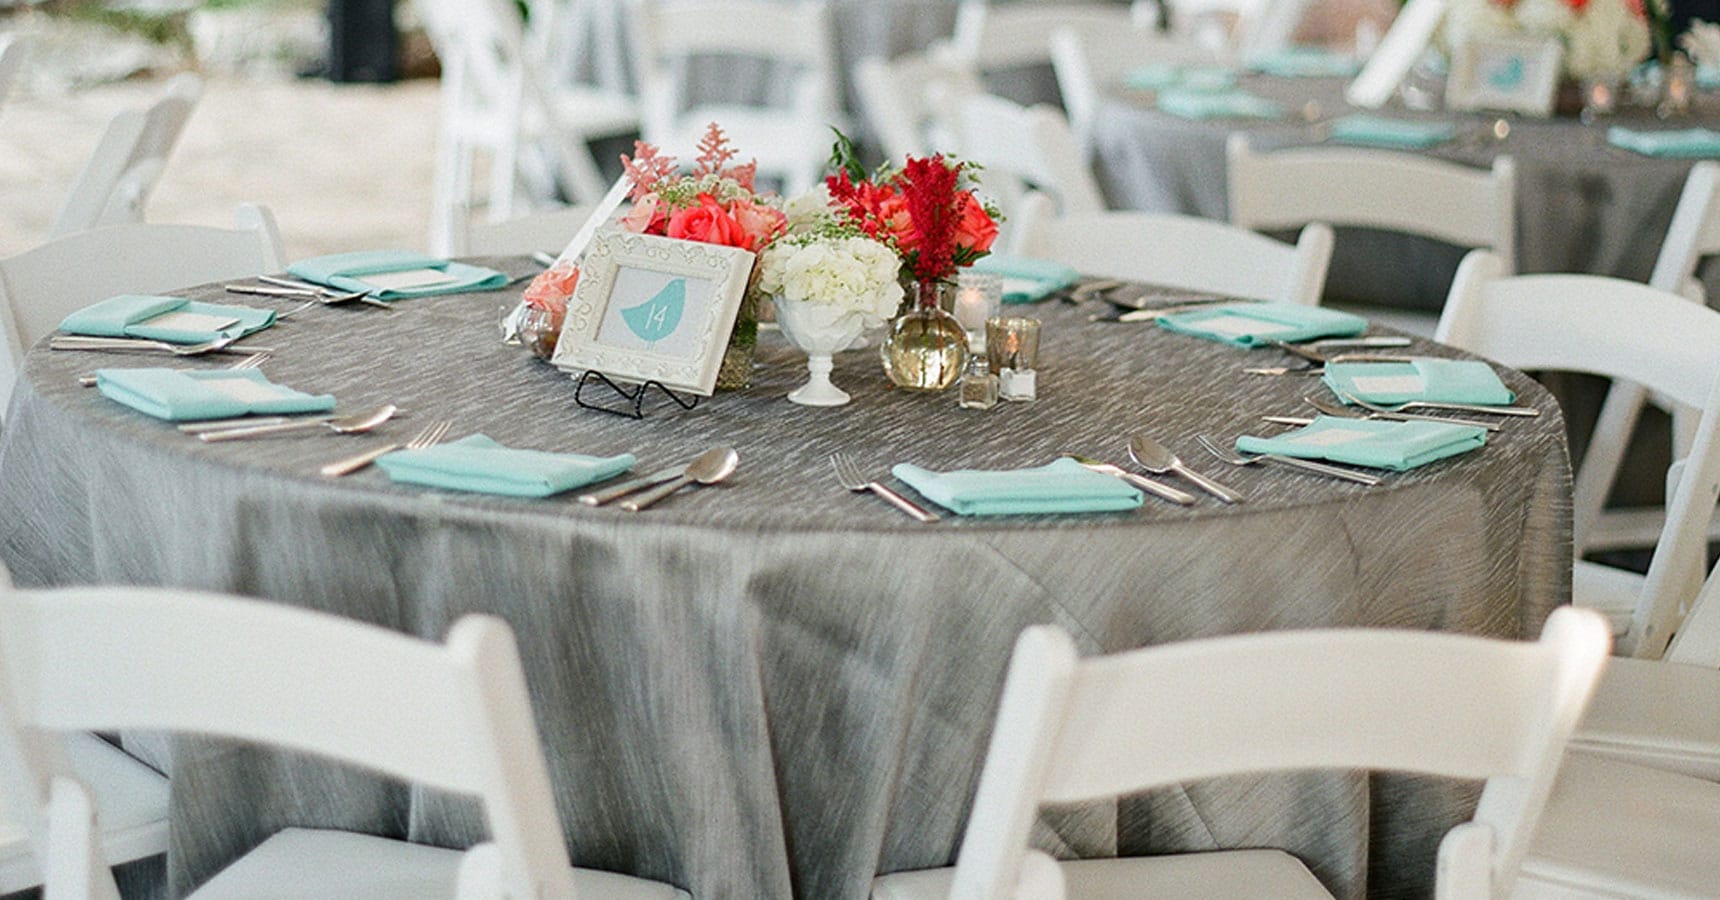 Table setting at a wedding reception